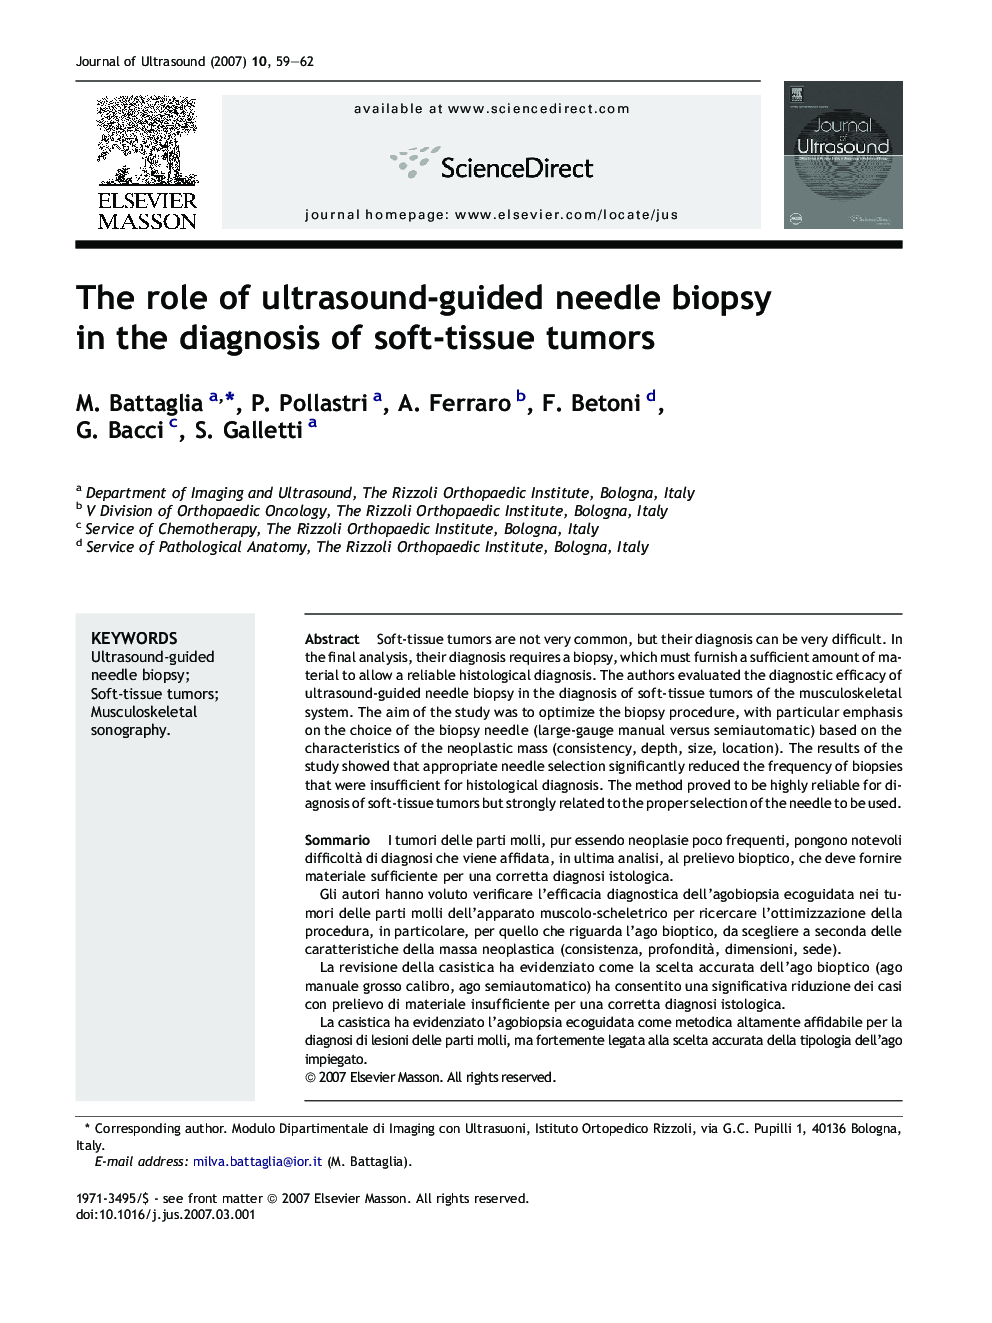 The role of ultrasound-guided needle biopsy in the diagnosis of soft-tissue tumors